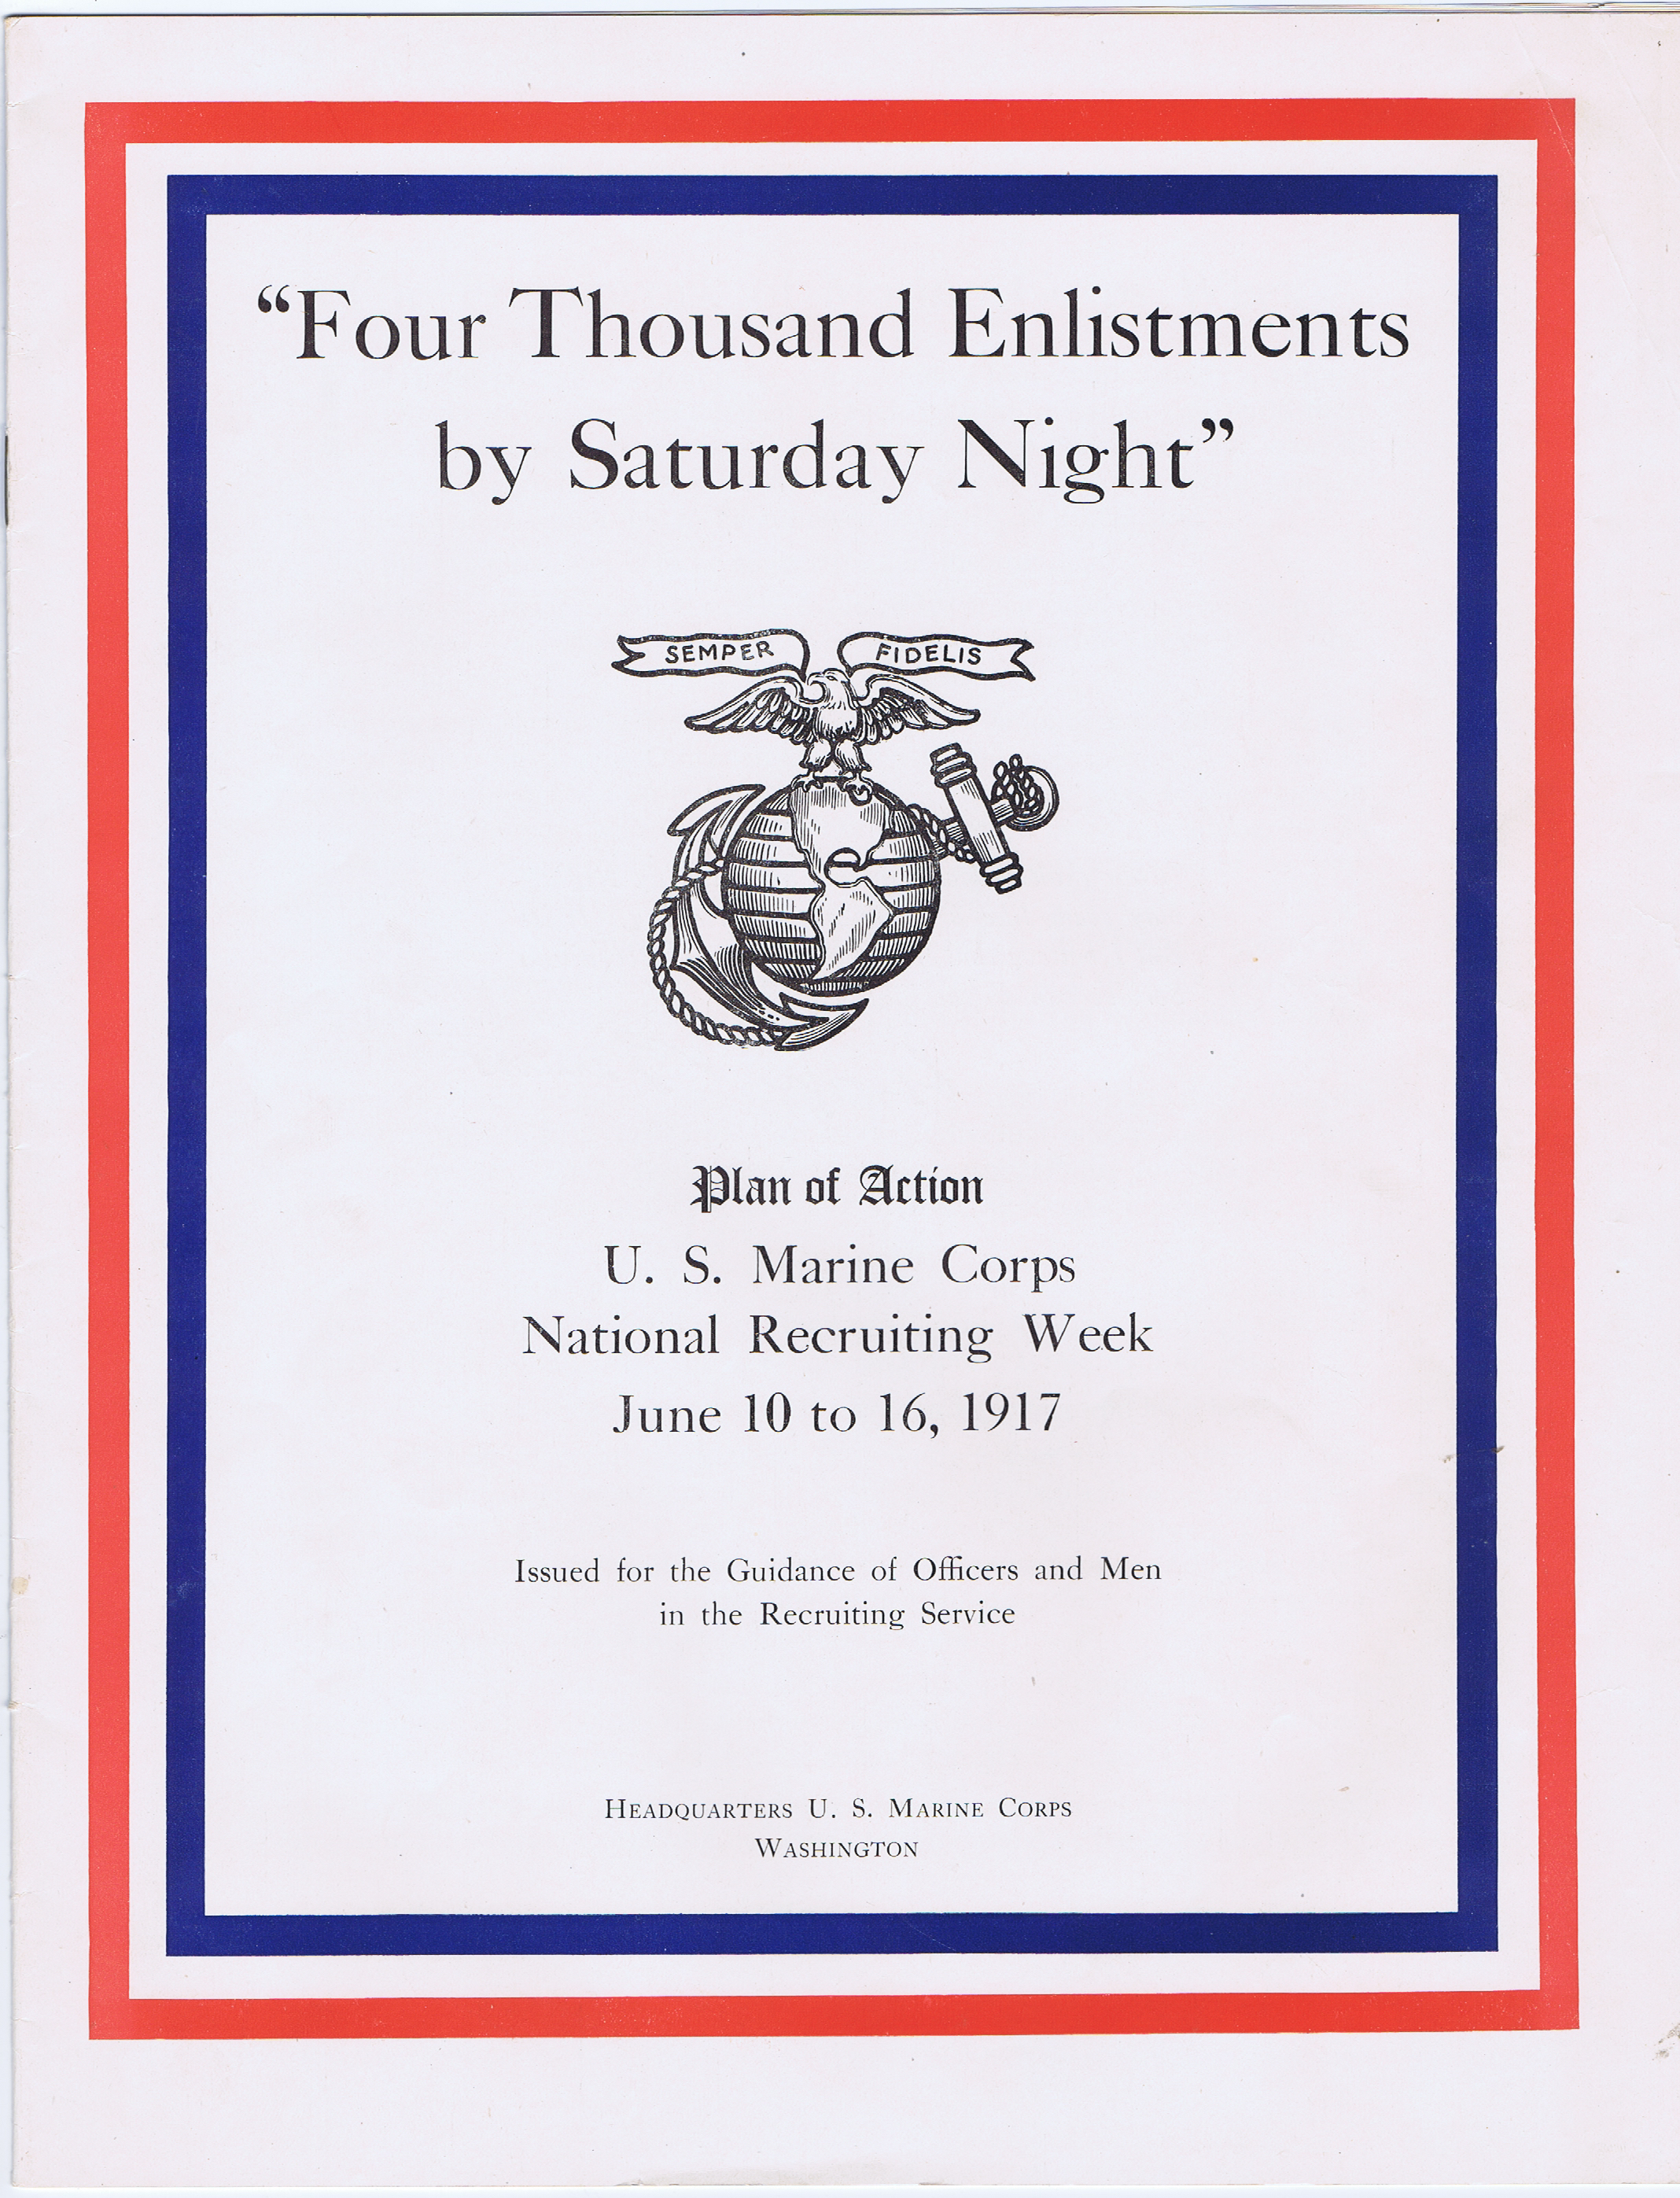 J844	U.S. MARINES “FOUR THOUSAND ENLISTMENTS BY SATURDAY NIGHT” - “PLAN OF ACTION”